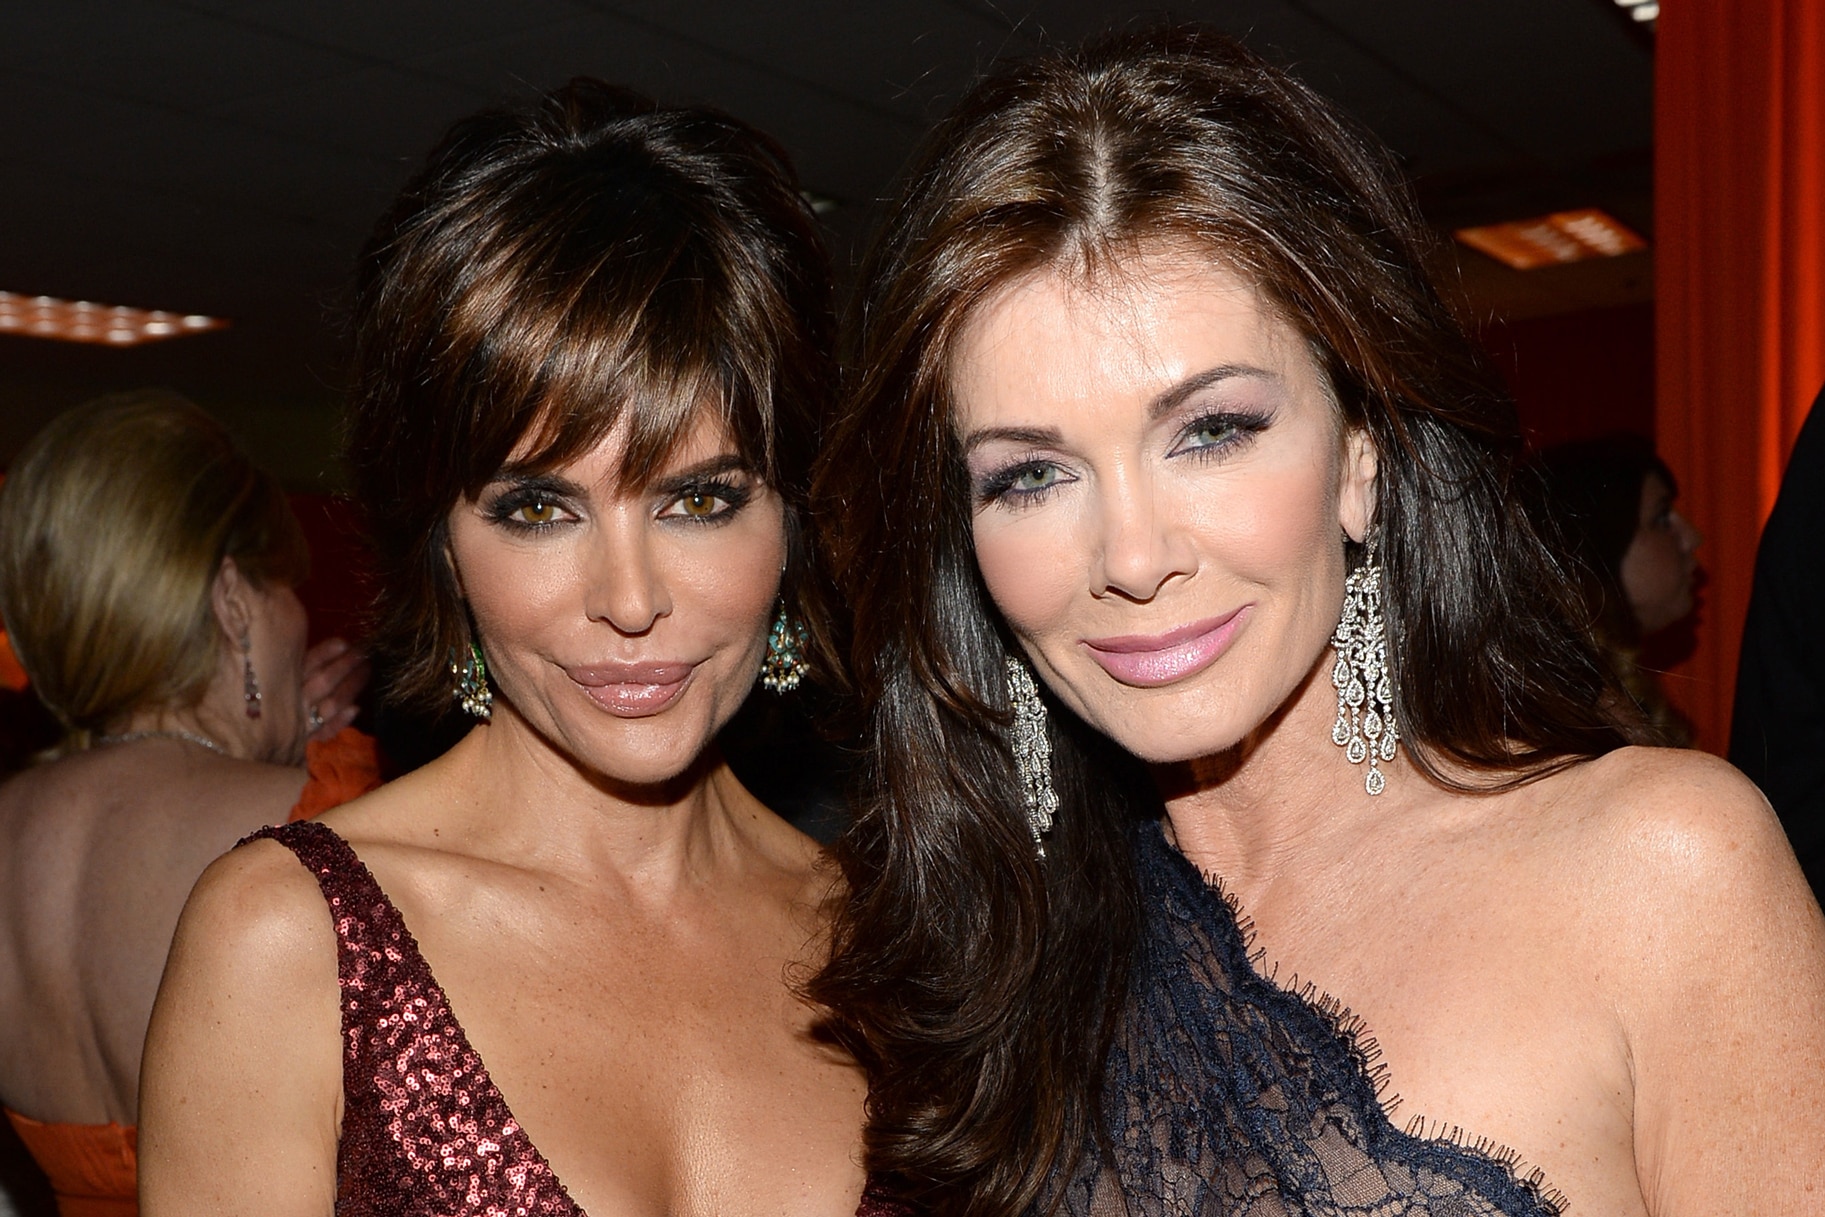 Exclusive Details: Lisa Rinna Gets Into Car Accident